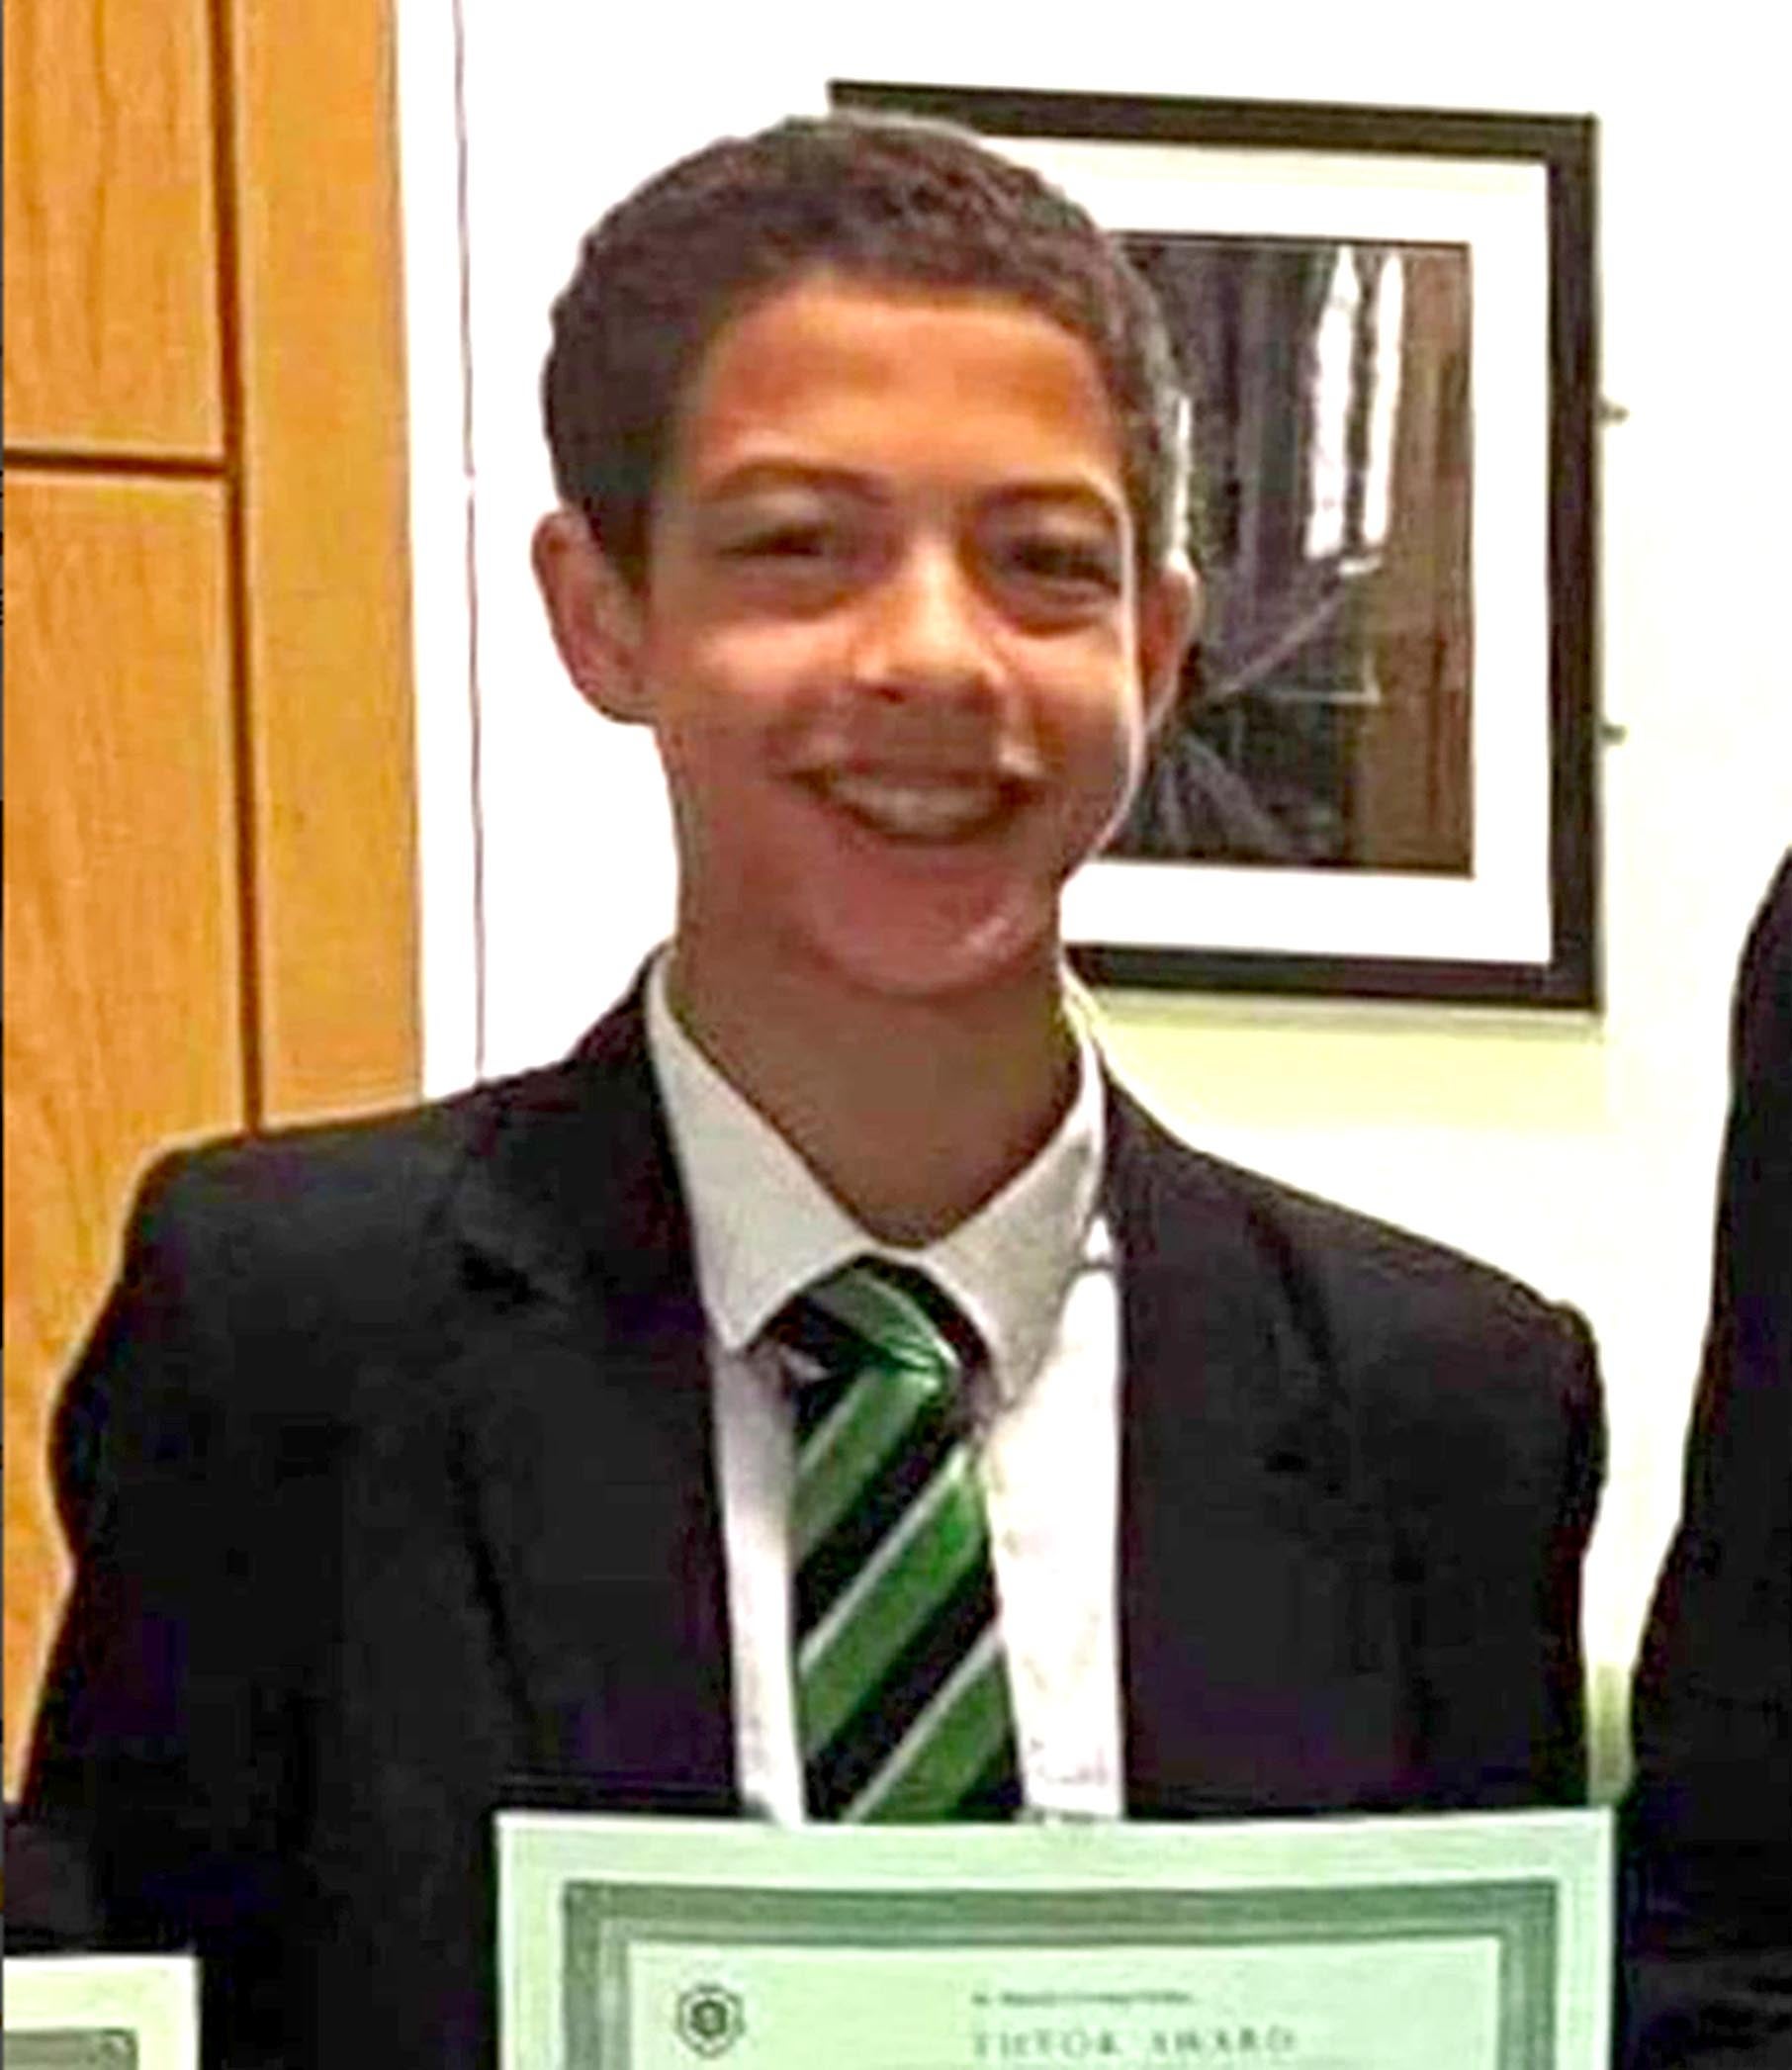 Noah Donohoe, a 14-year-old pupil at St Malachy’s College, was found dead in a storm drain in north Belfast in June of 2020, six days after he went missing (Family handout/PA)